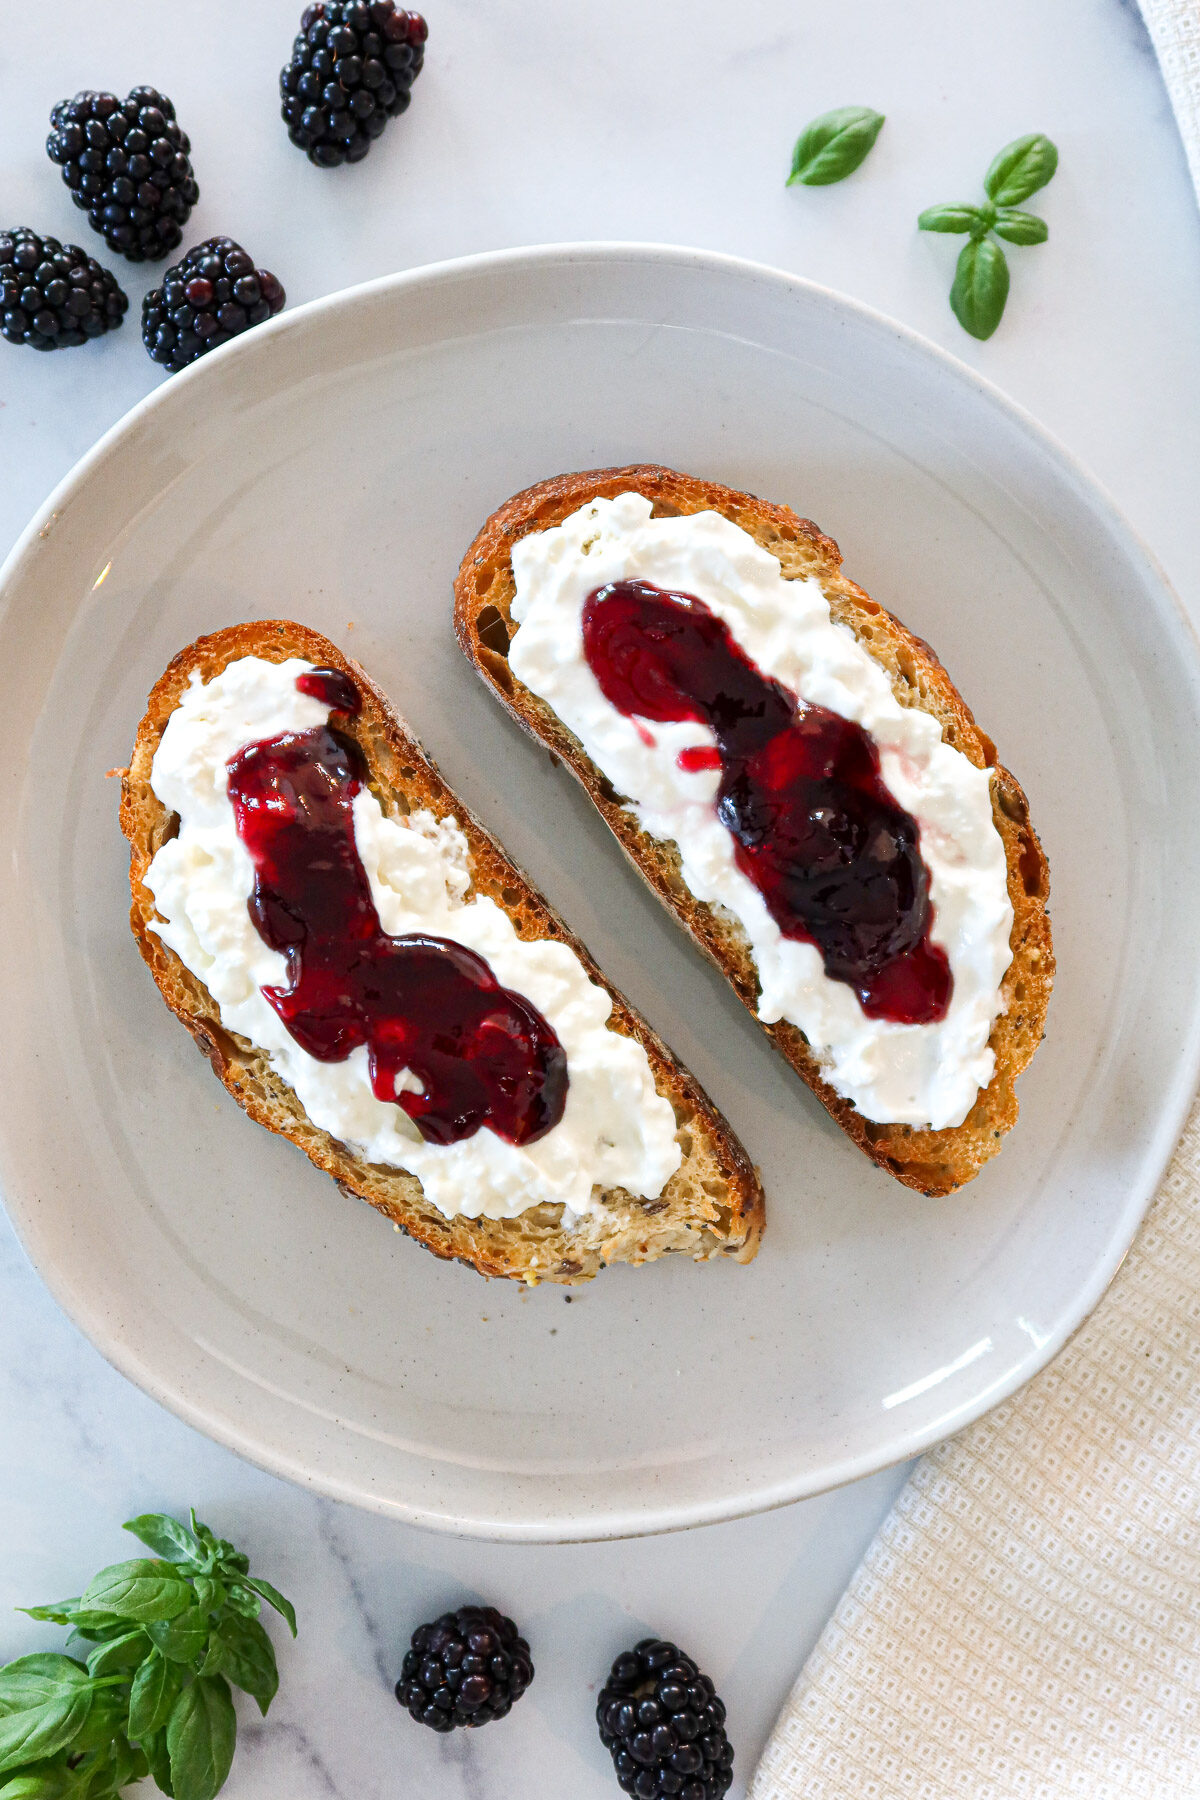 Toasted bread topped with creamy burrata cheese and blackberry preserves.